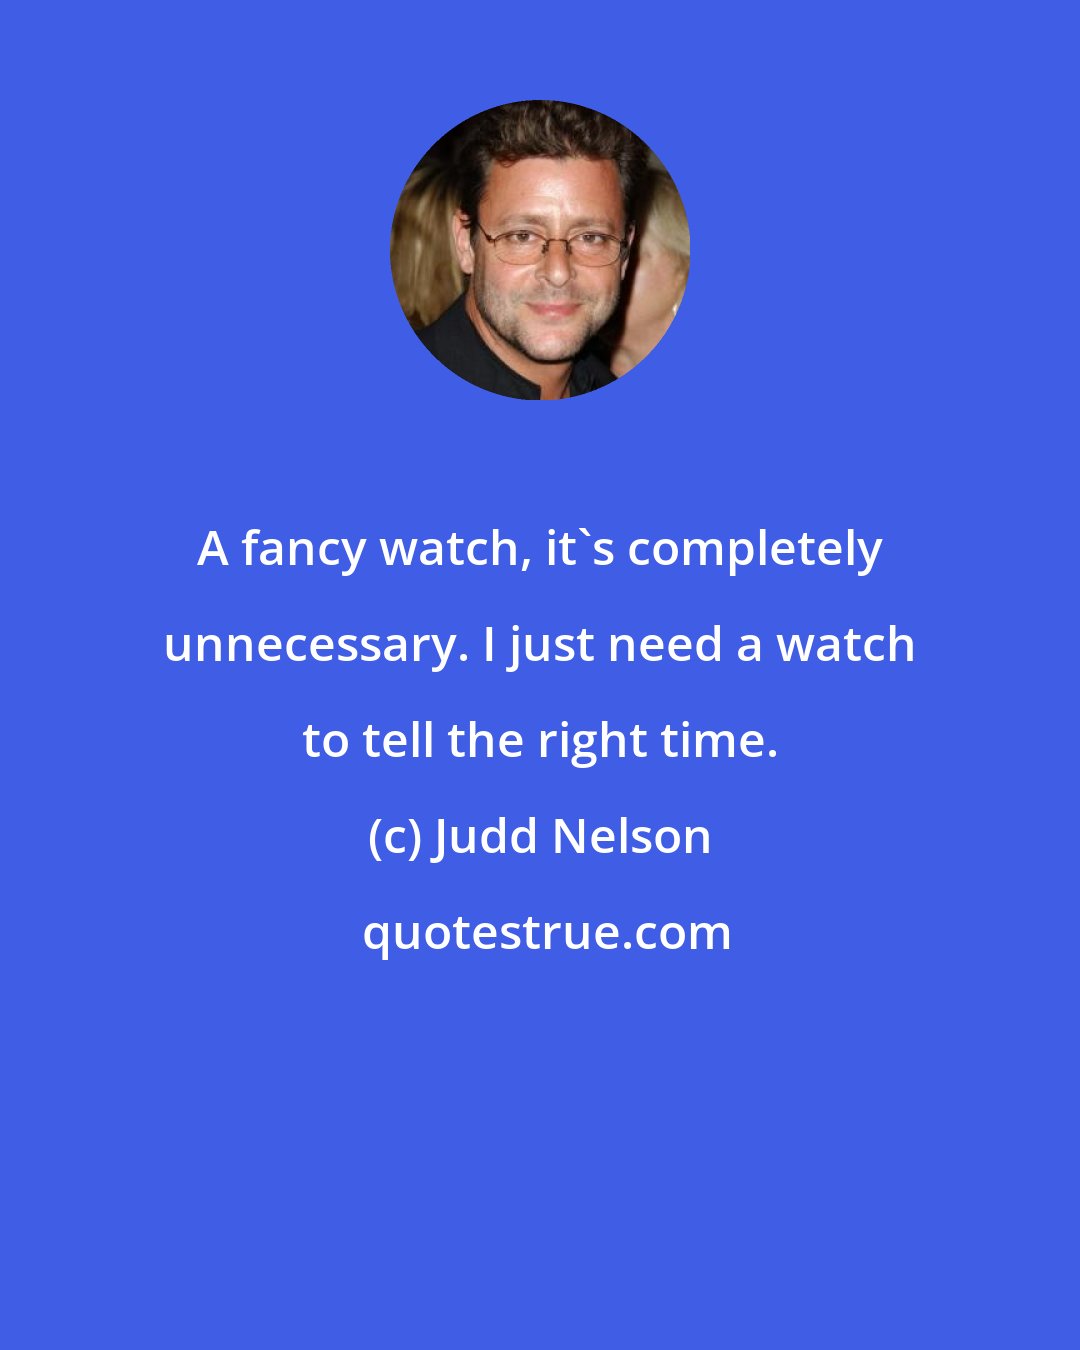 Judd Nelson: A fancy watch, it's completely unnecessary. I just need a watch to tell the right time.